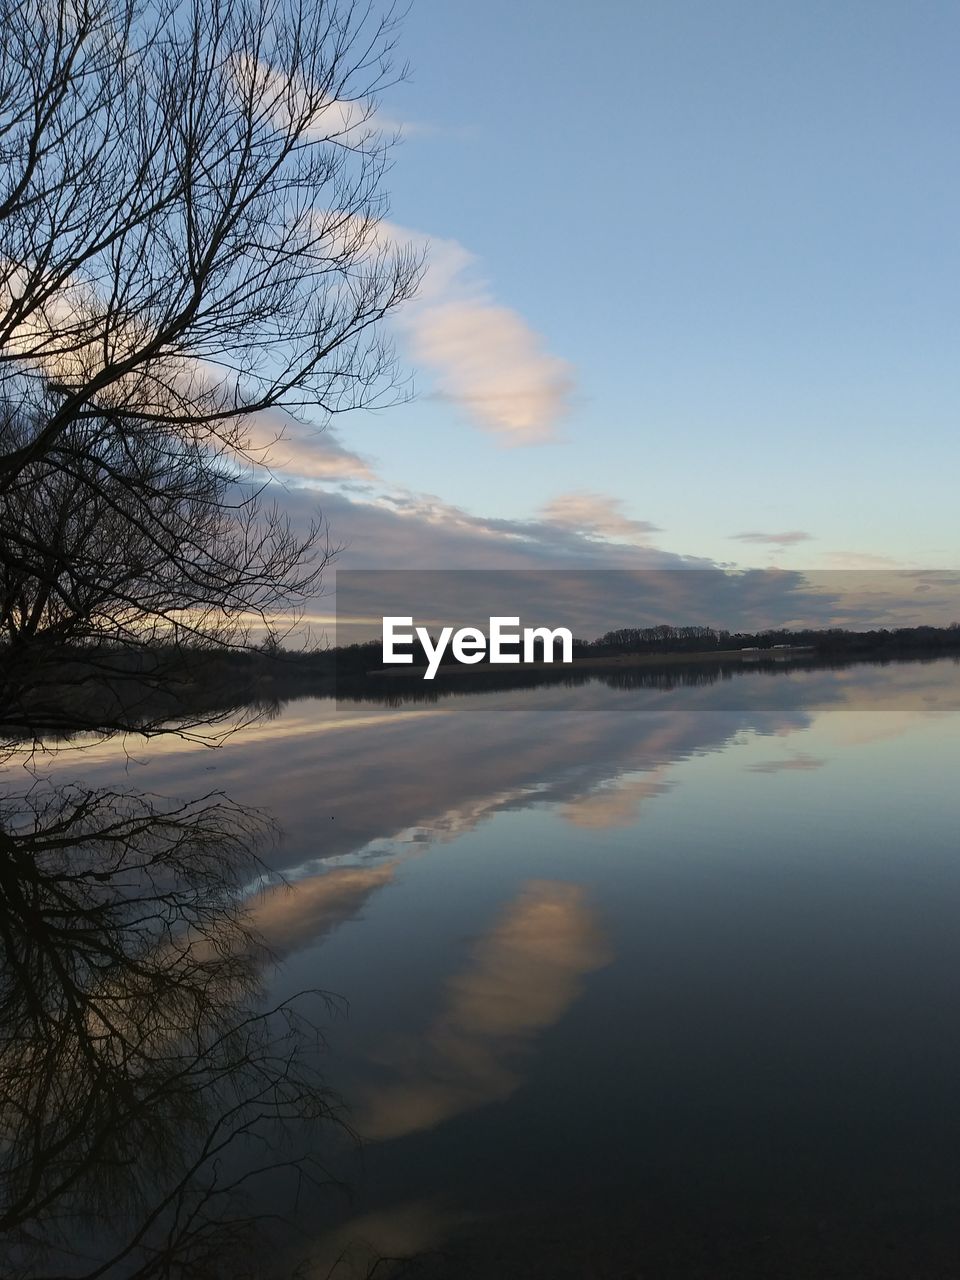 SCENIC VIEW OF FROZEN LAKE AGAINST SKY DURING SUNSET